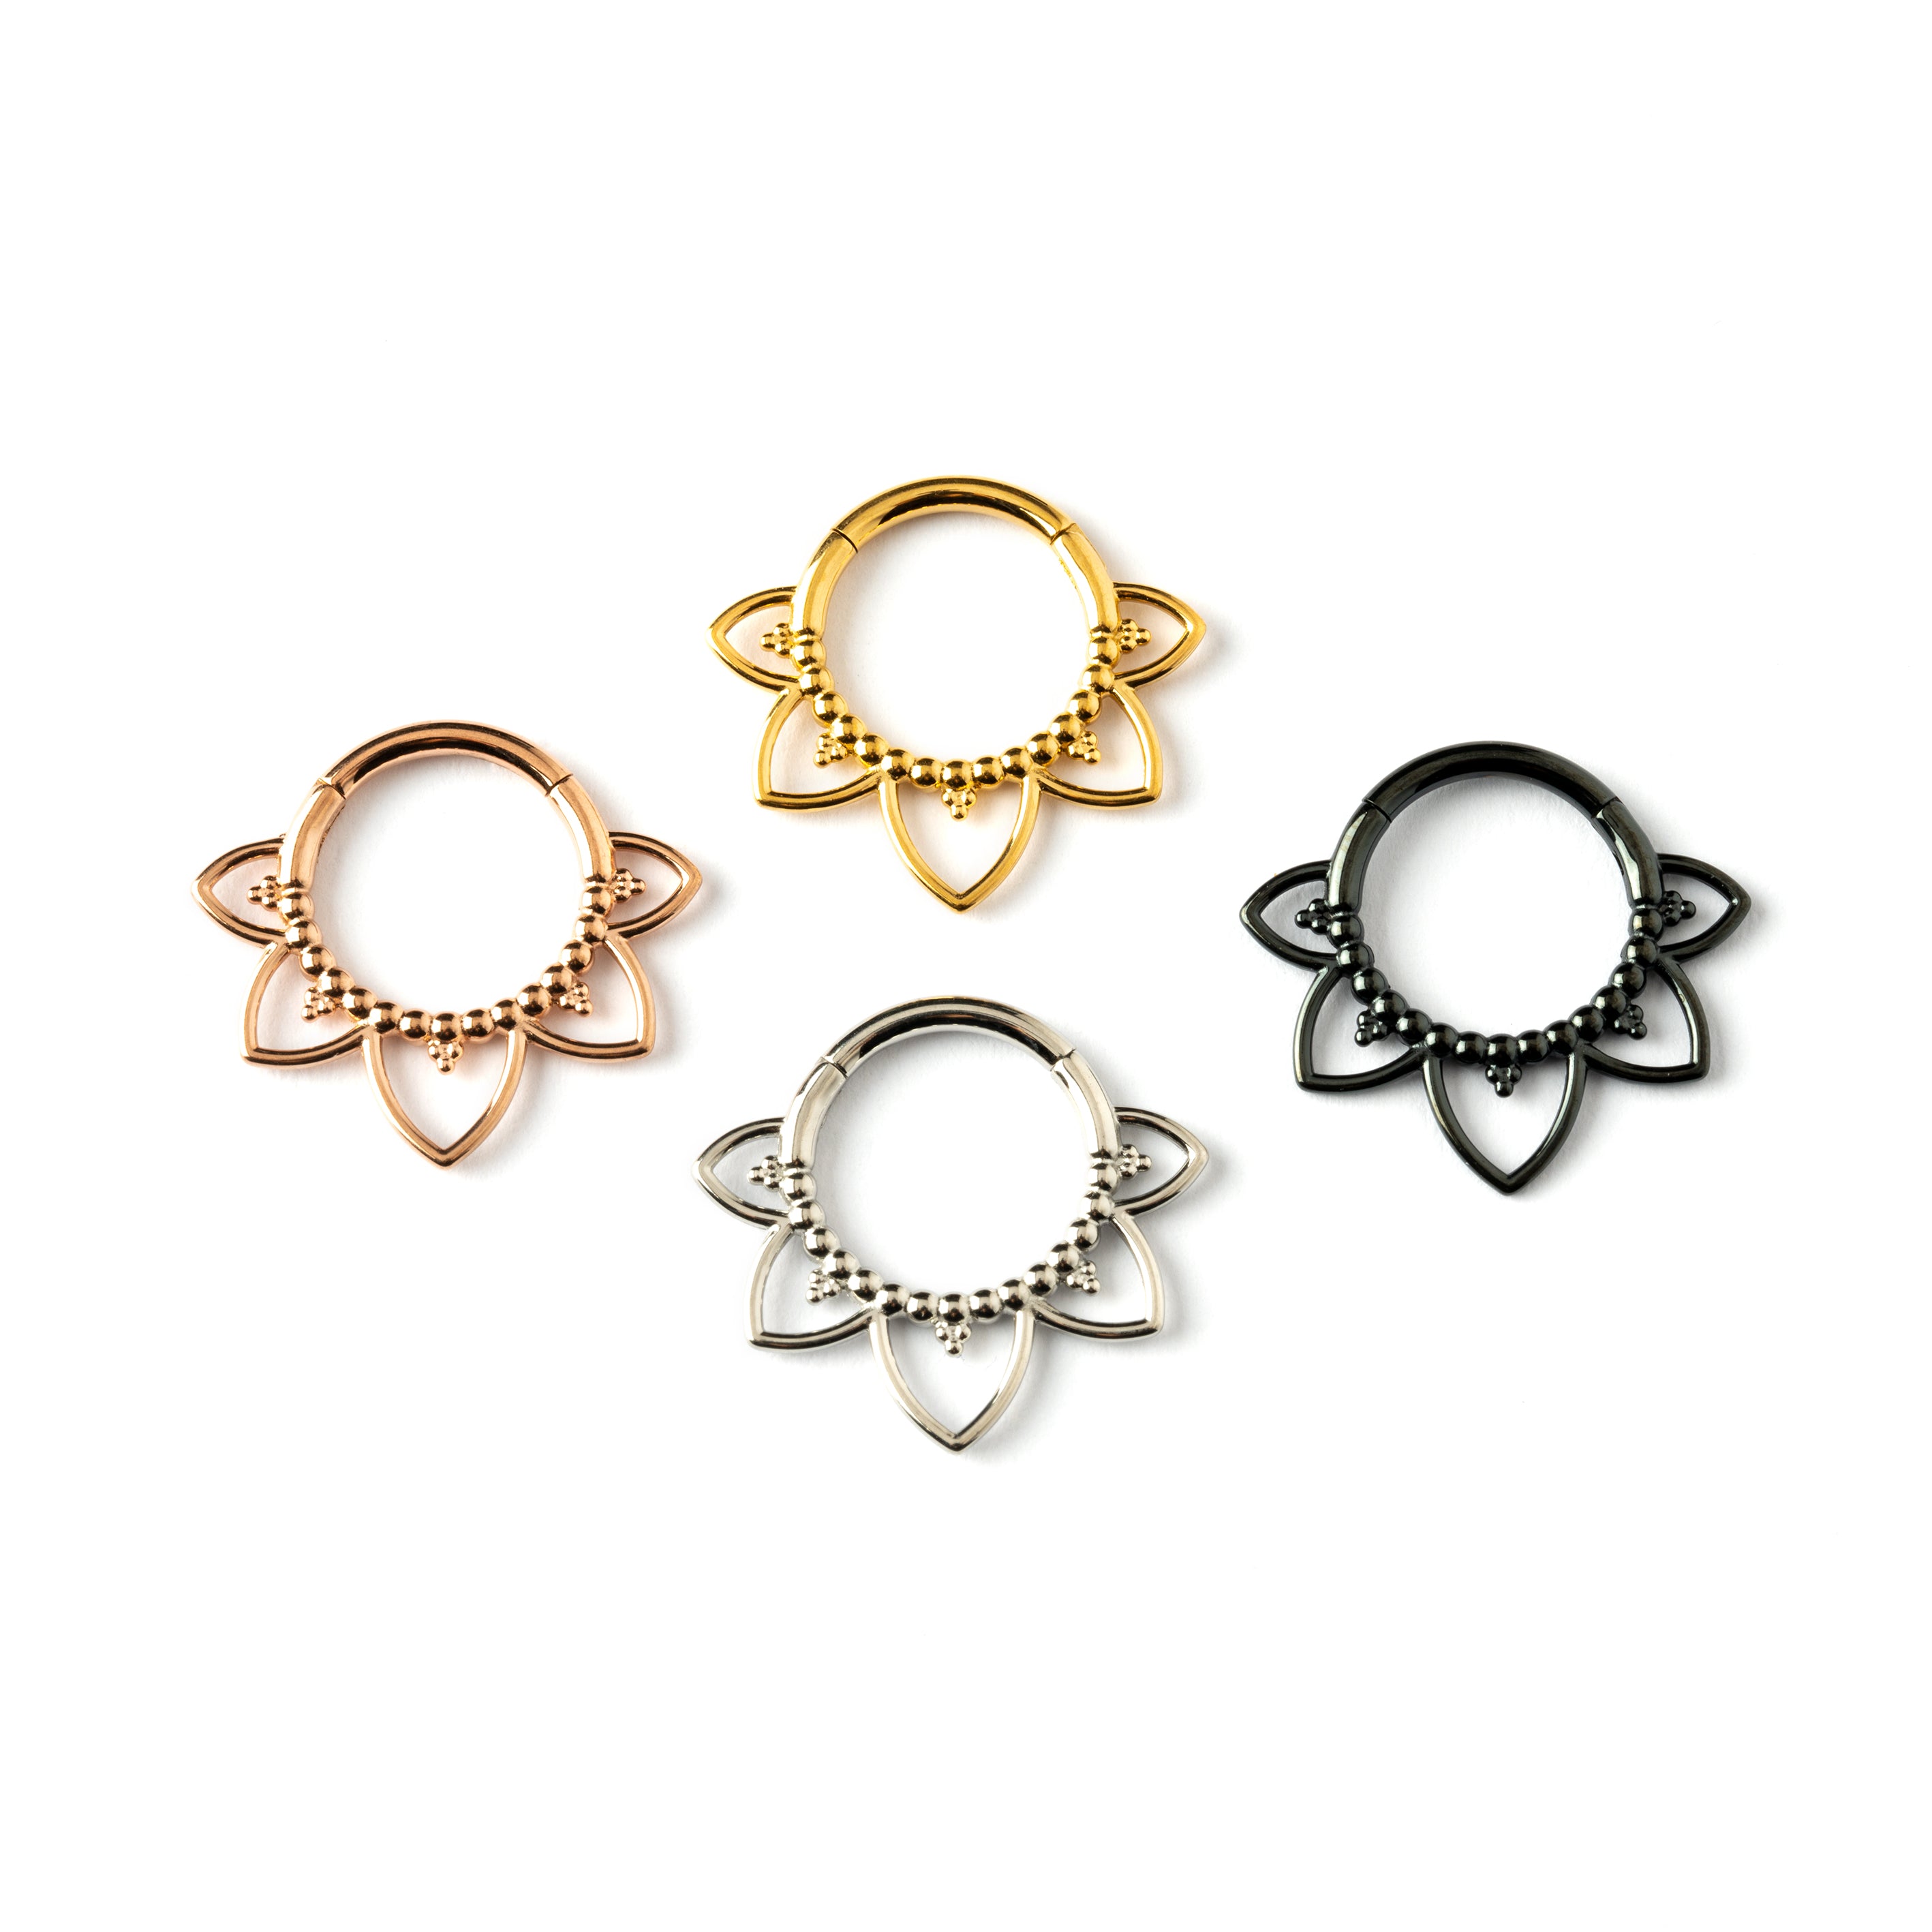 Iryia surgical steel, black, rose gold and gold open lotus septum clickers frontal